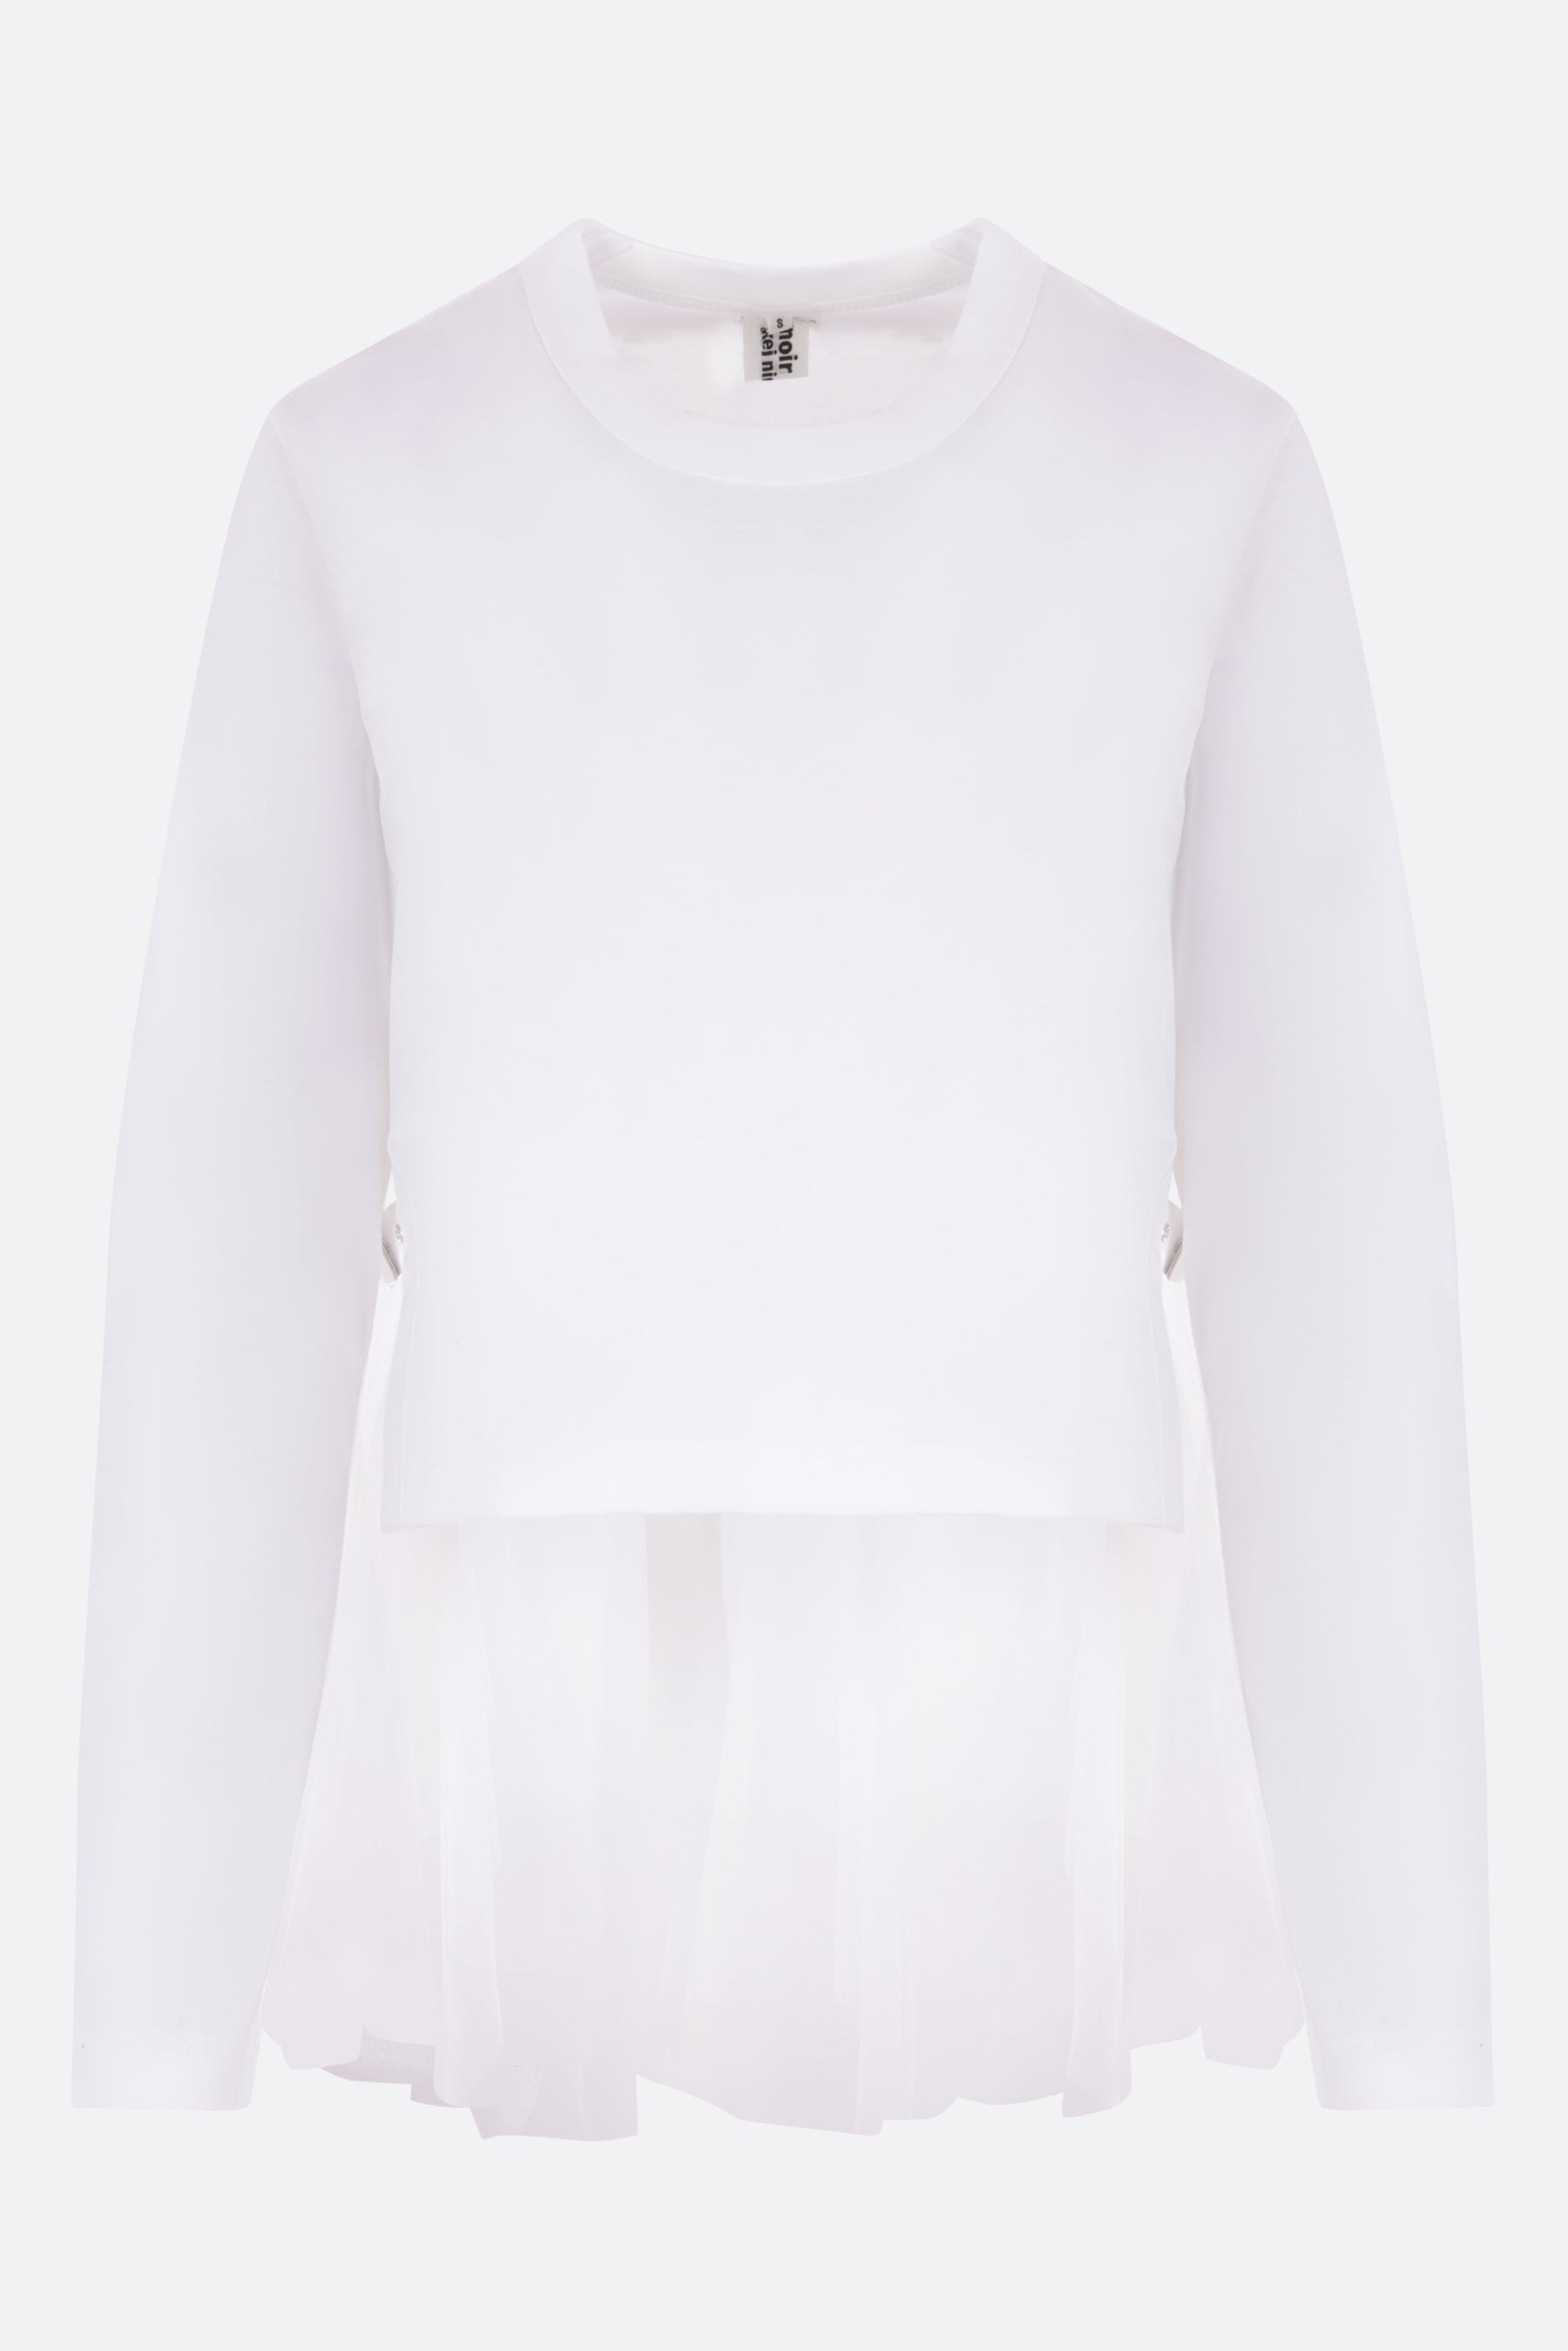 cotton and tulle long-sleeved t-shirt